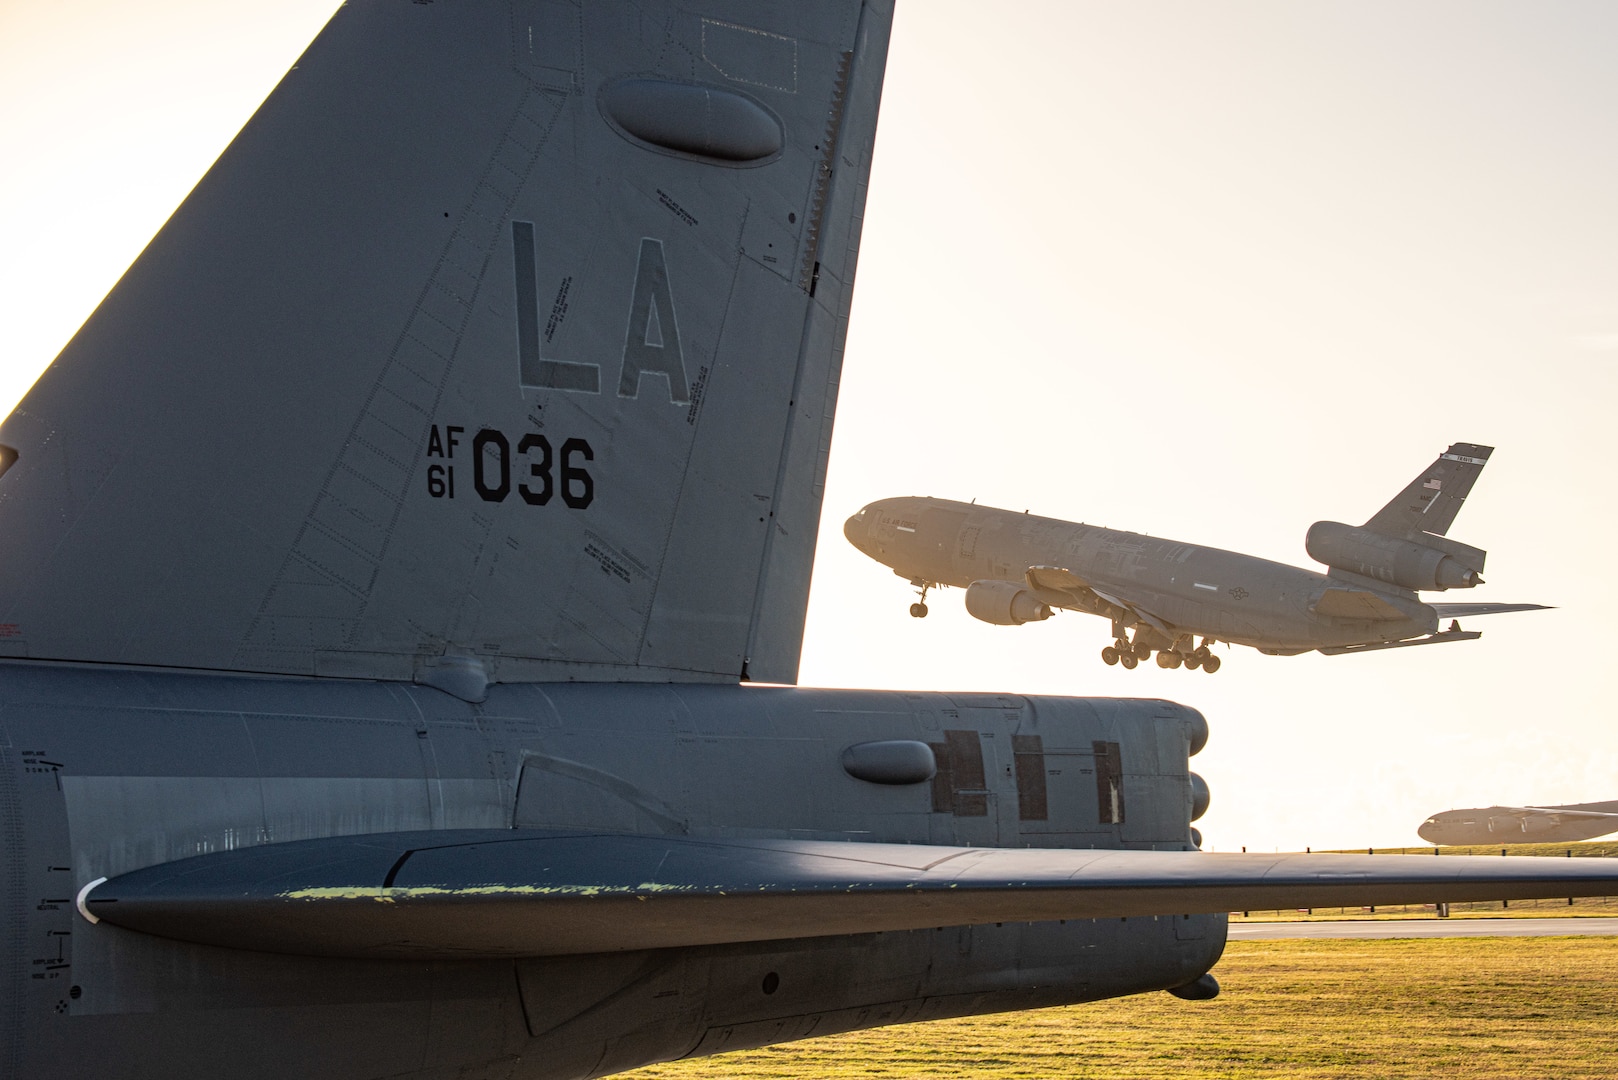 A KC-10 Extender from Travis Air Force Base, California, takes off in front of a B-52H Stratofortress at Andersen Air Force Base, Guam, Feb. 21, 2022. The B-52 aircrews will execute Bomber Task Force missions by integrating with partners and allies in support of a free and open Indo-Pacific region. (U.S. Air Force photo by Senior Airman Jonathan E. Ramos)